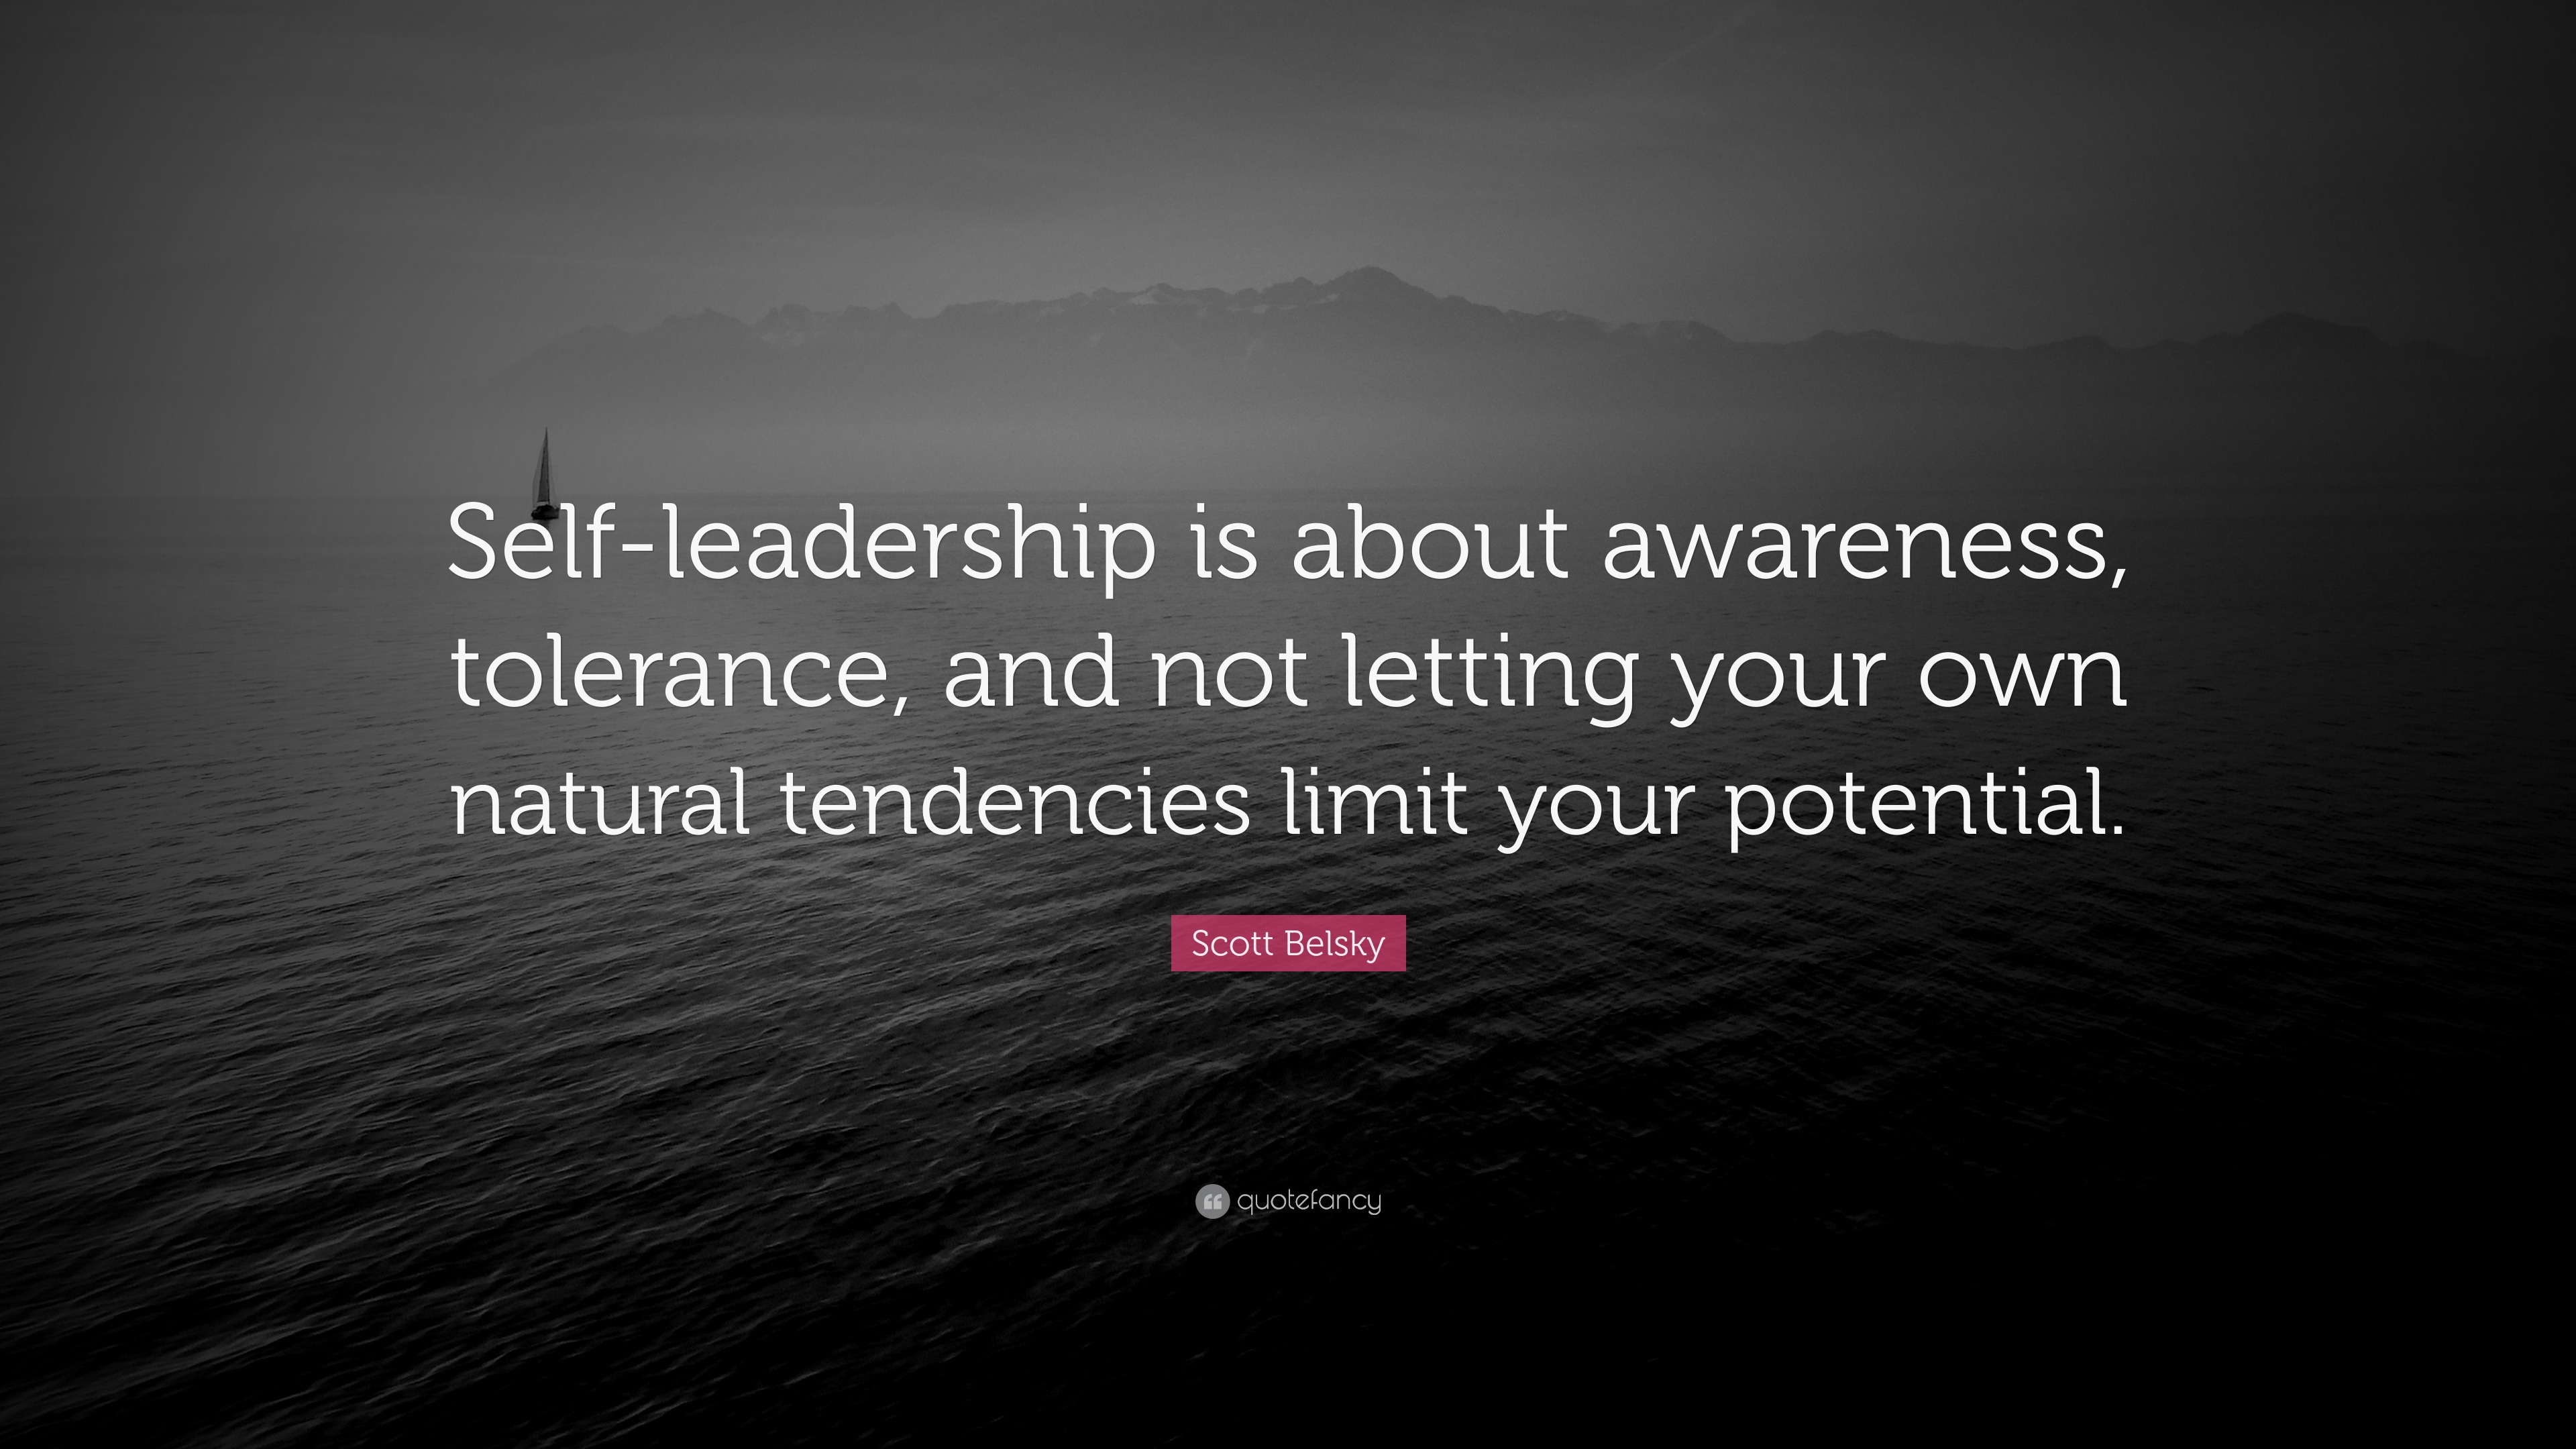 Scott Belsky Quote: “Self-leadership is about awareness, tolerance, and